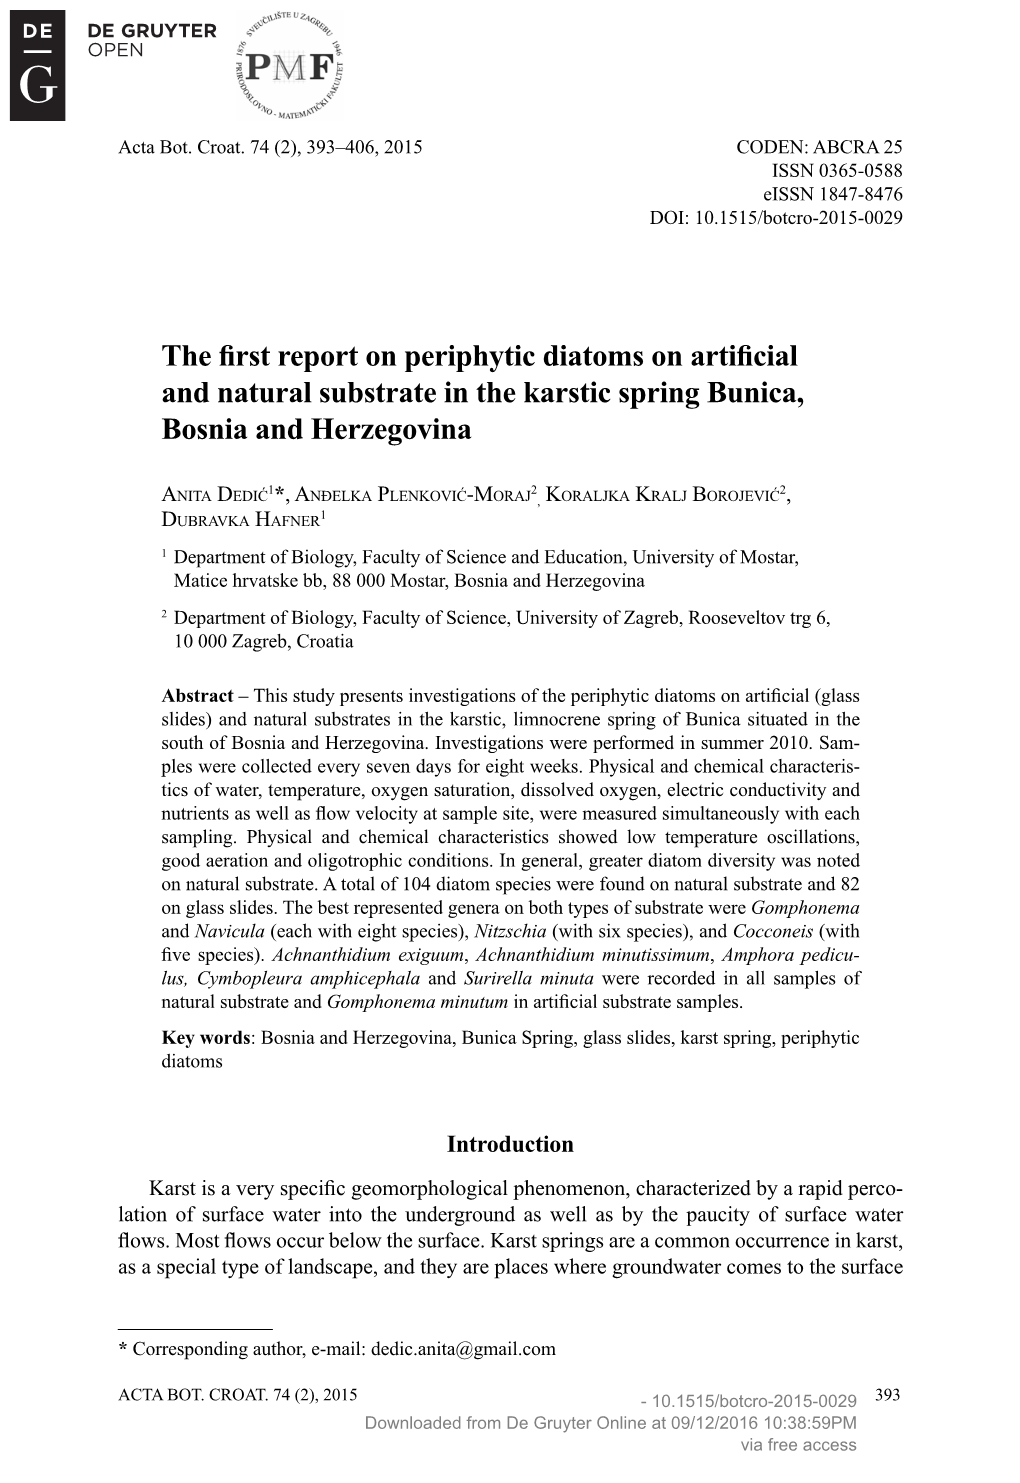 The First Report on Periphytic Diatoms on Artificial And